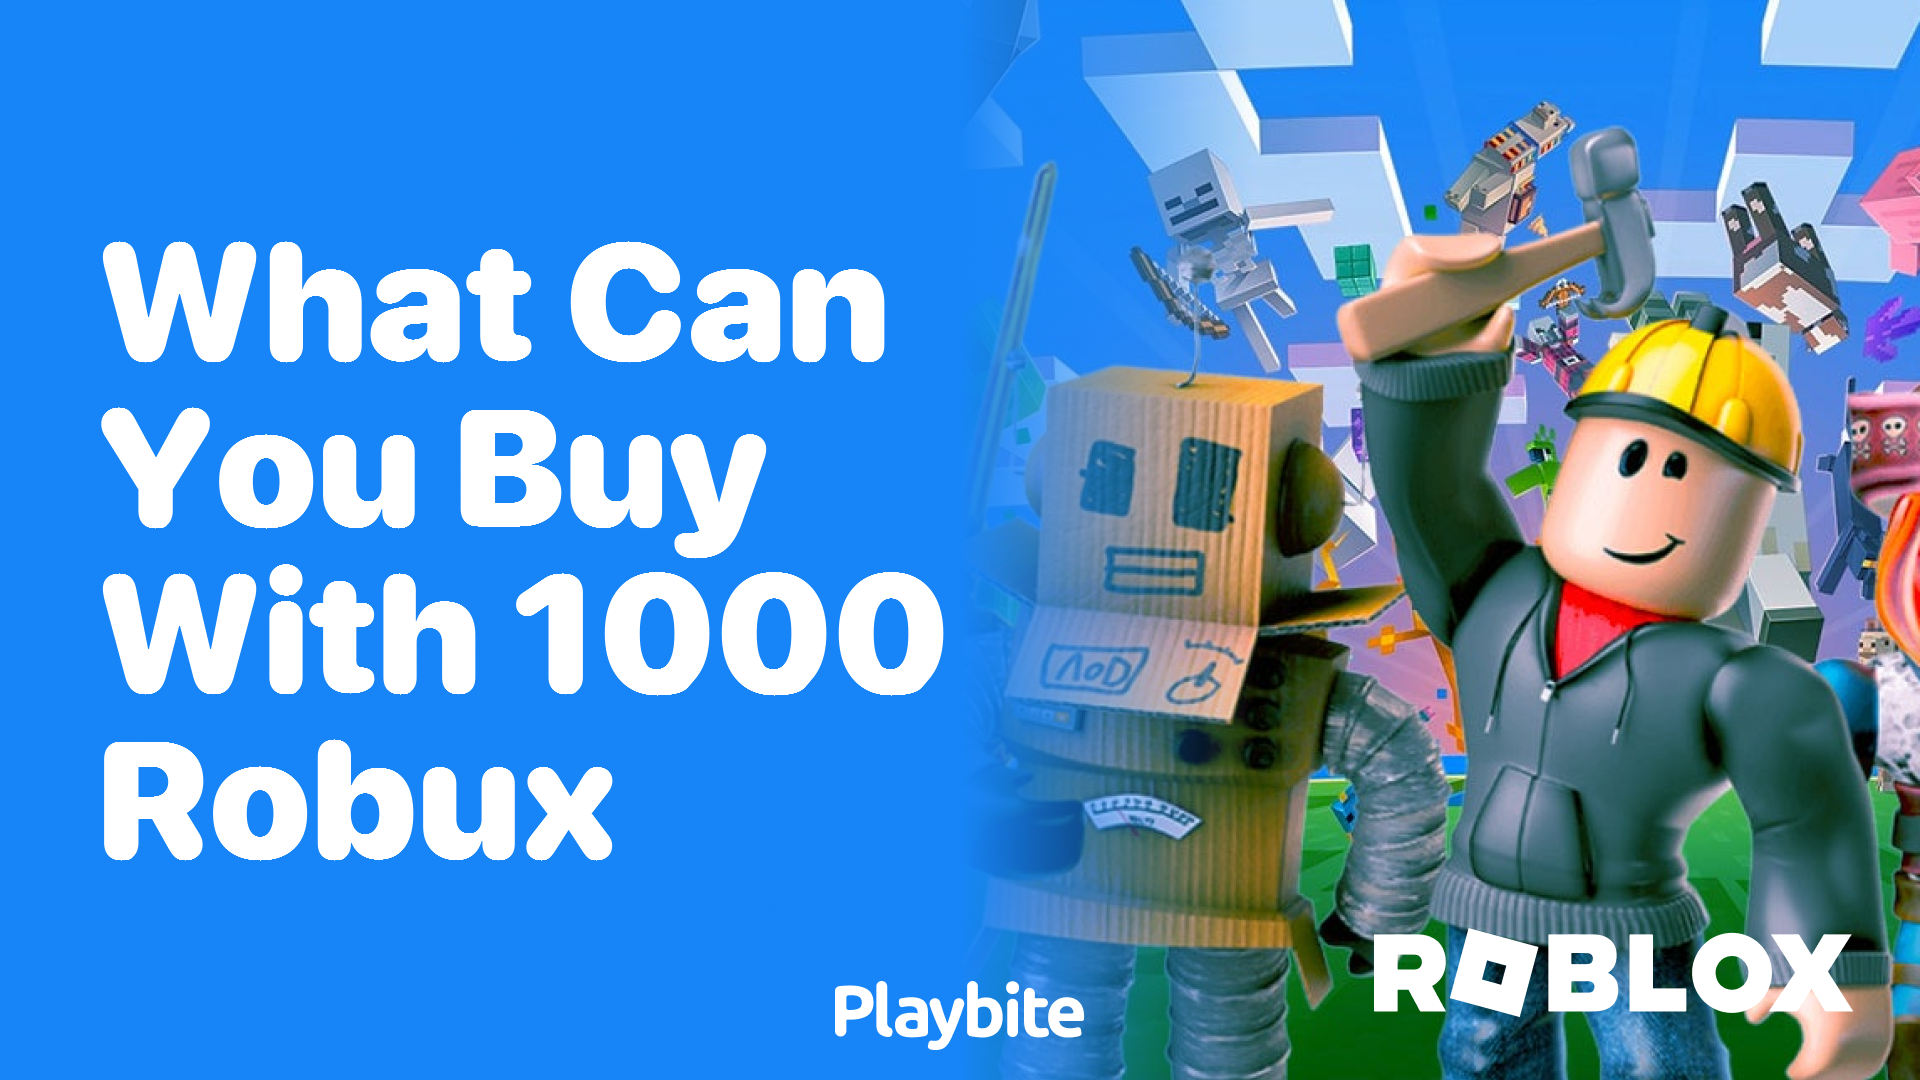 What Can You Buy with 1000 Robux?